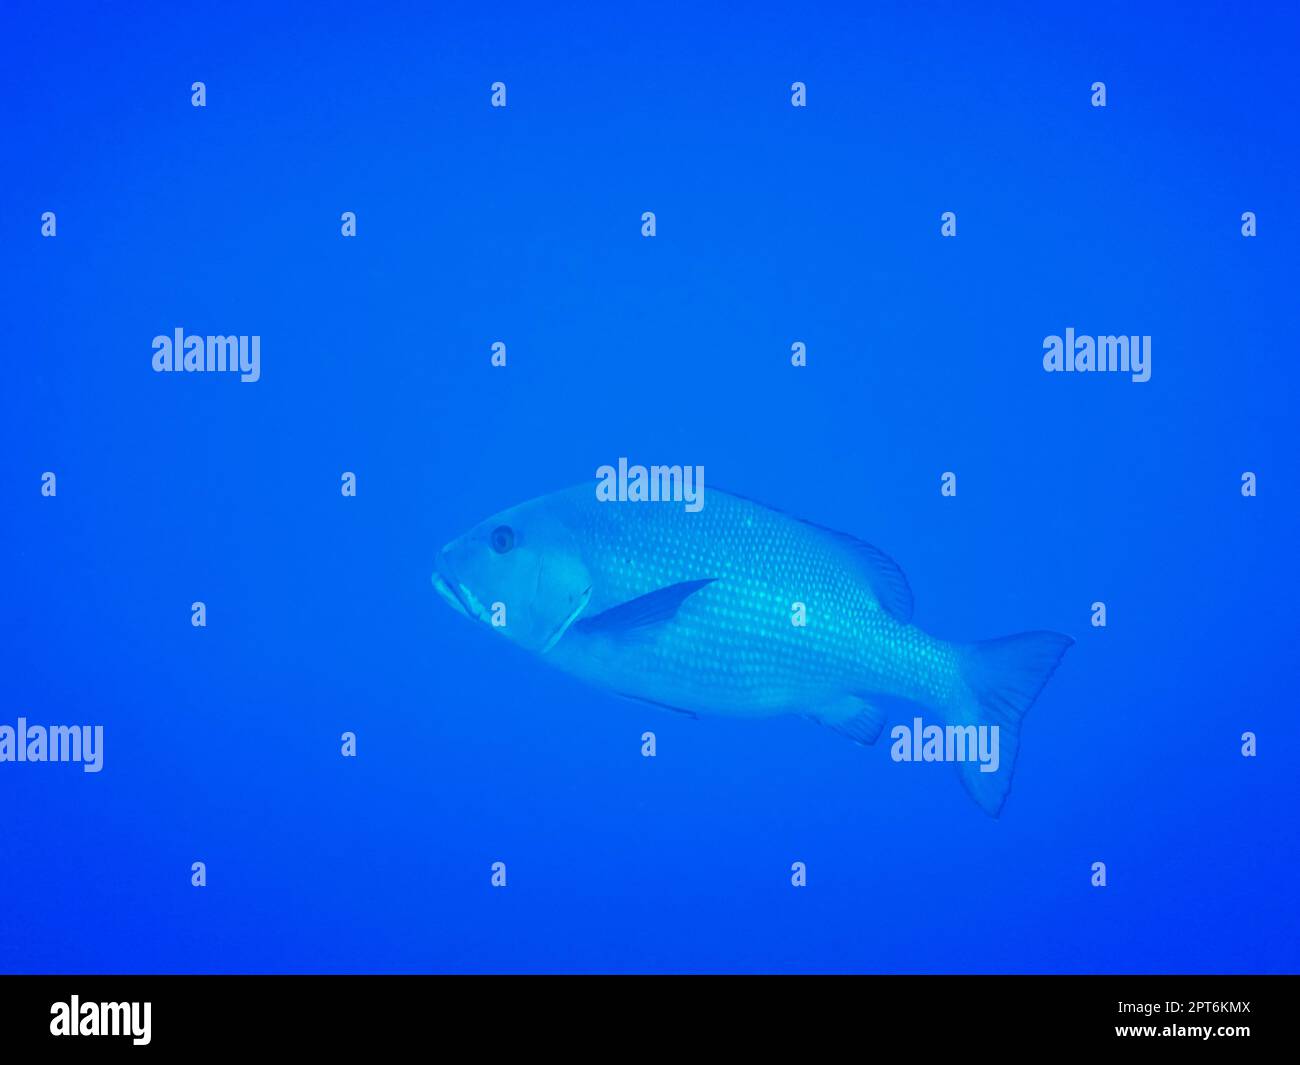 single large common dentex fish in blue water from egypt side view Stock Photo